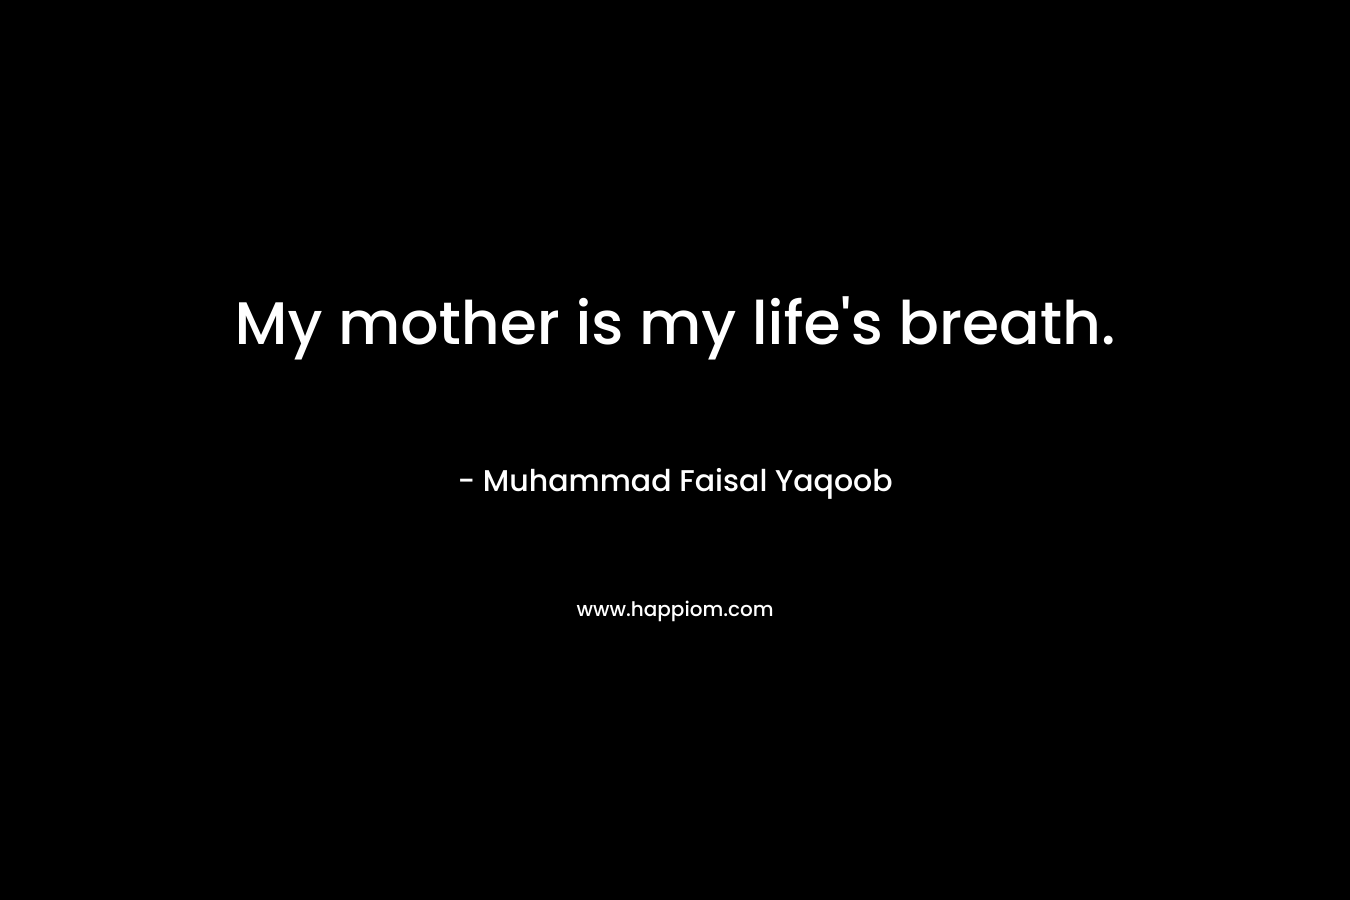 My mother is my life's breath.